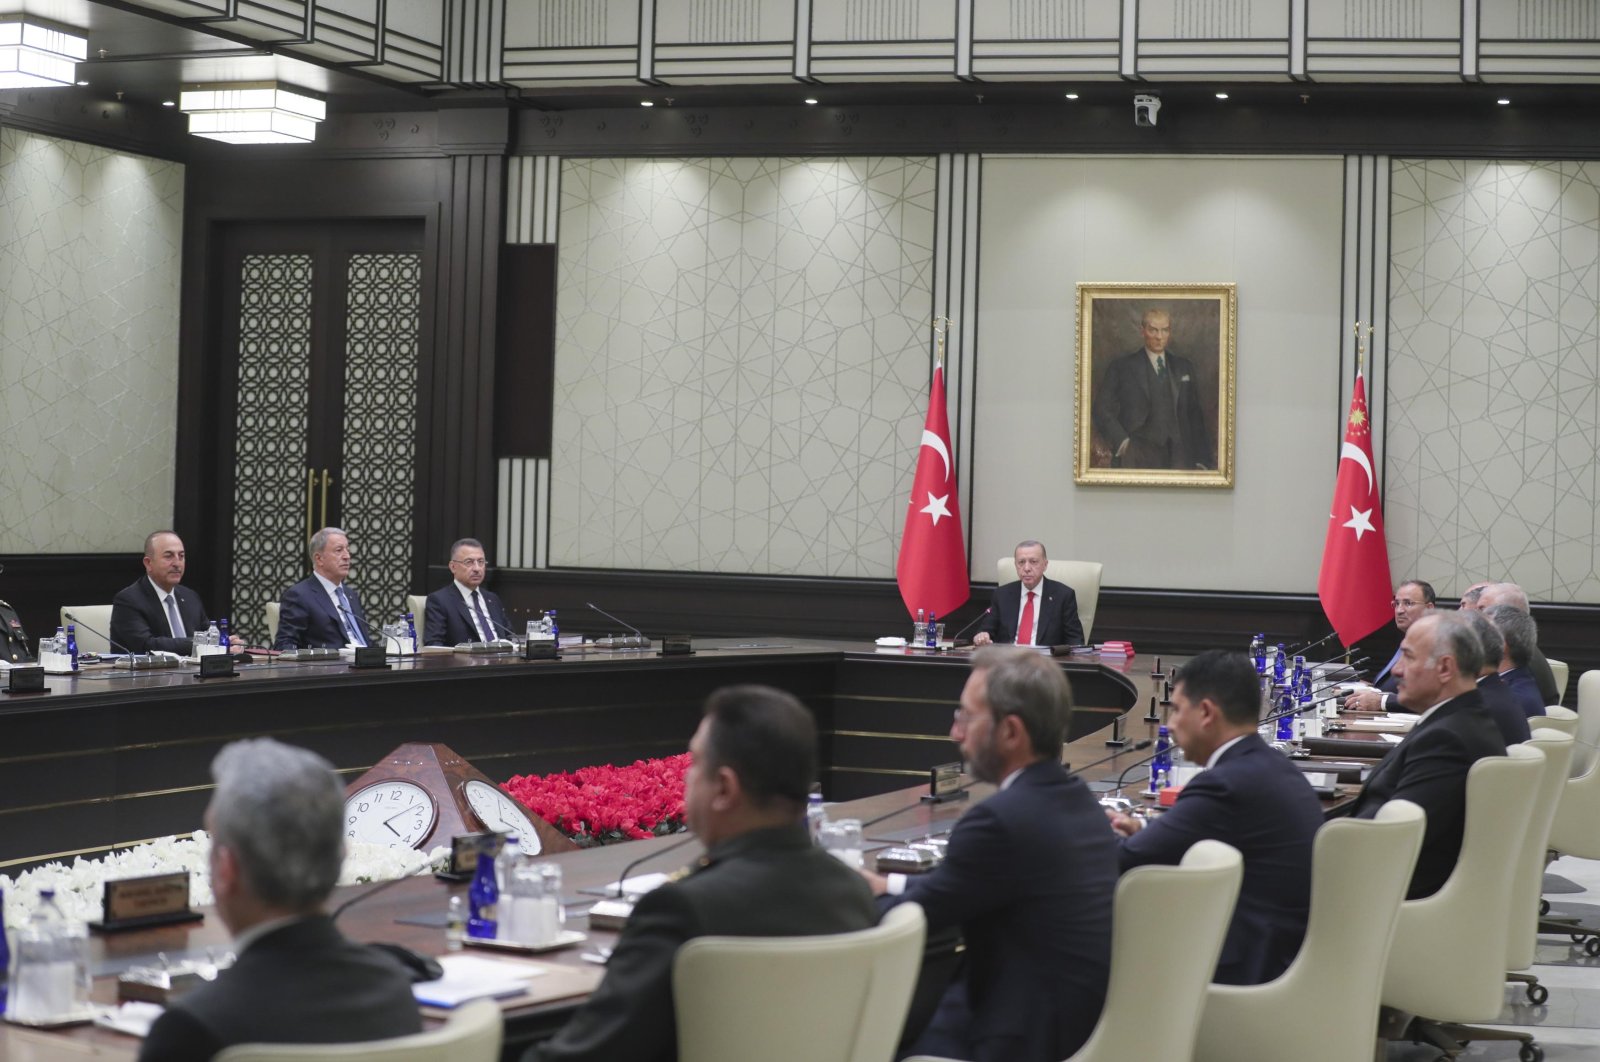 The National Security Council, led by President Recep Tayyip Erdoğan, convenes at the Presidential Complex in Ankara, Turkey, July 21, 2022. (DHA Photo)